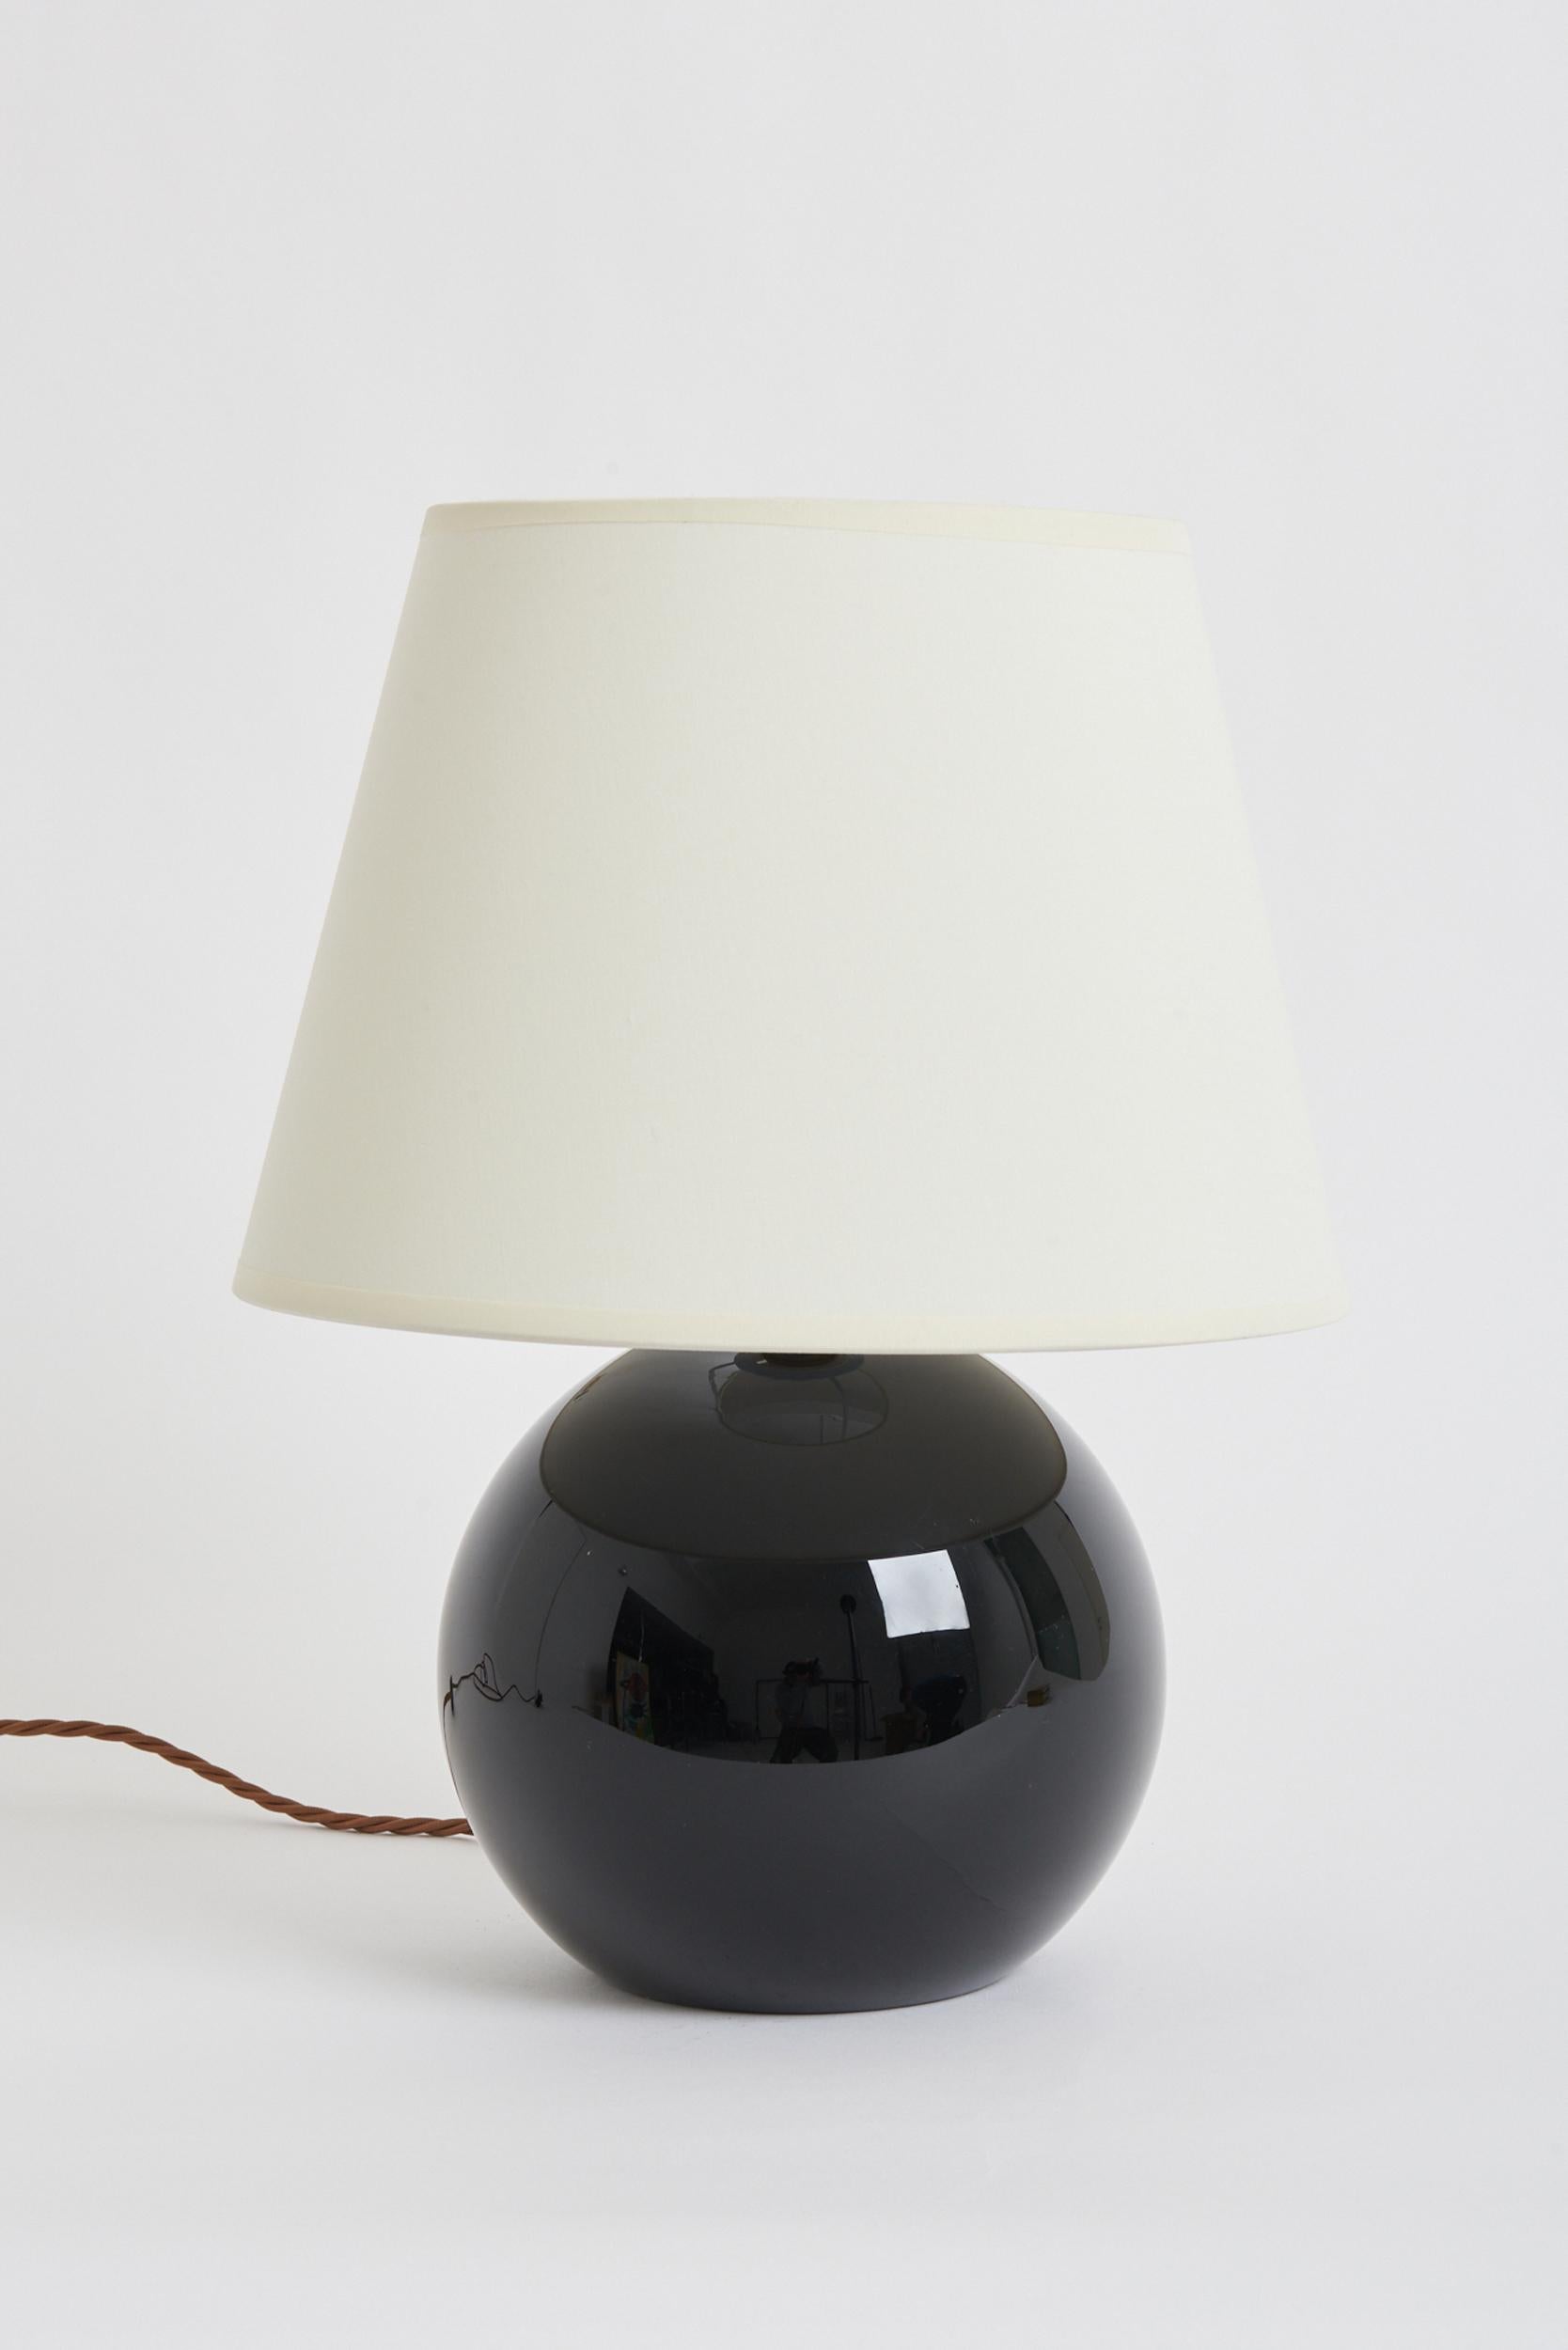 An Art Deco black opaline glass table lamp by Jacques Adnet (1900-1984).
France, circa 1930.
Measures: With the shade: 40 cm high by 30.5 cm diameter 
Lamp base only: 26 cm high by 17 cm diameter.